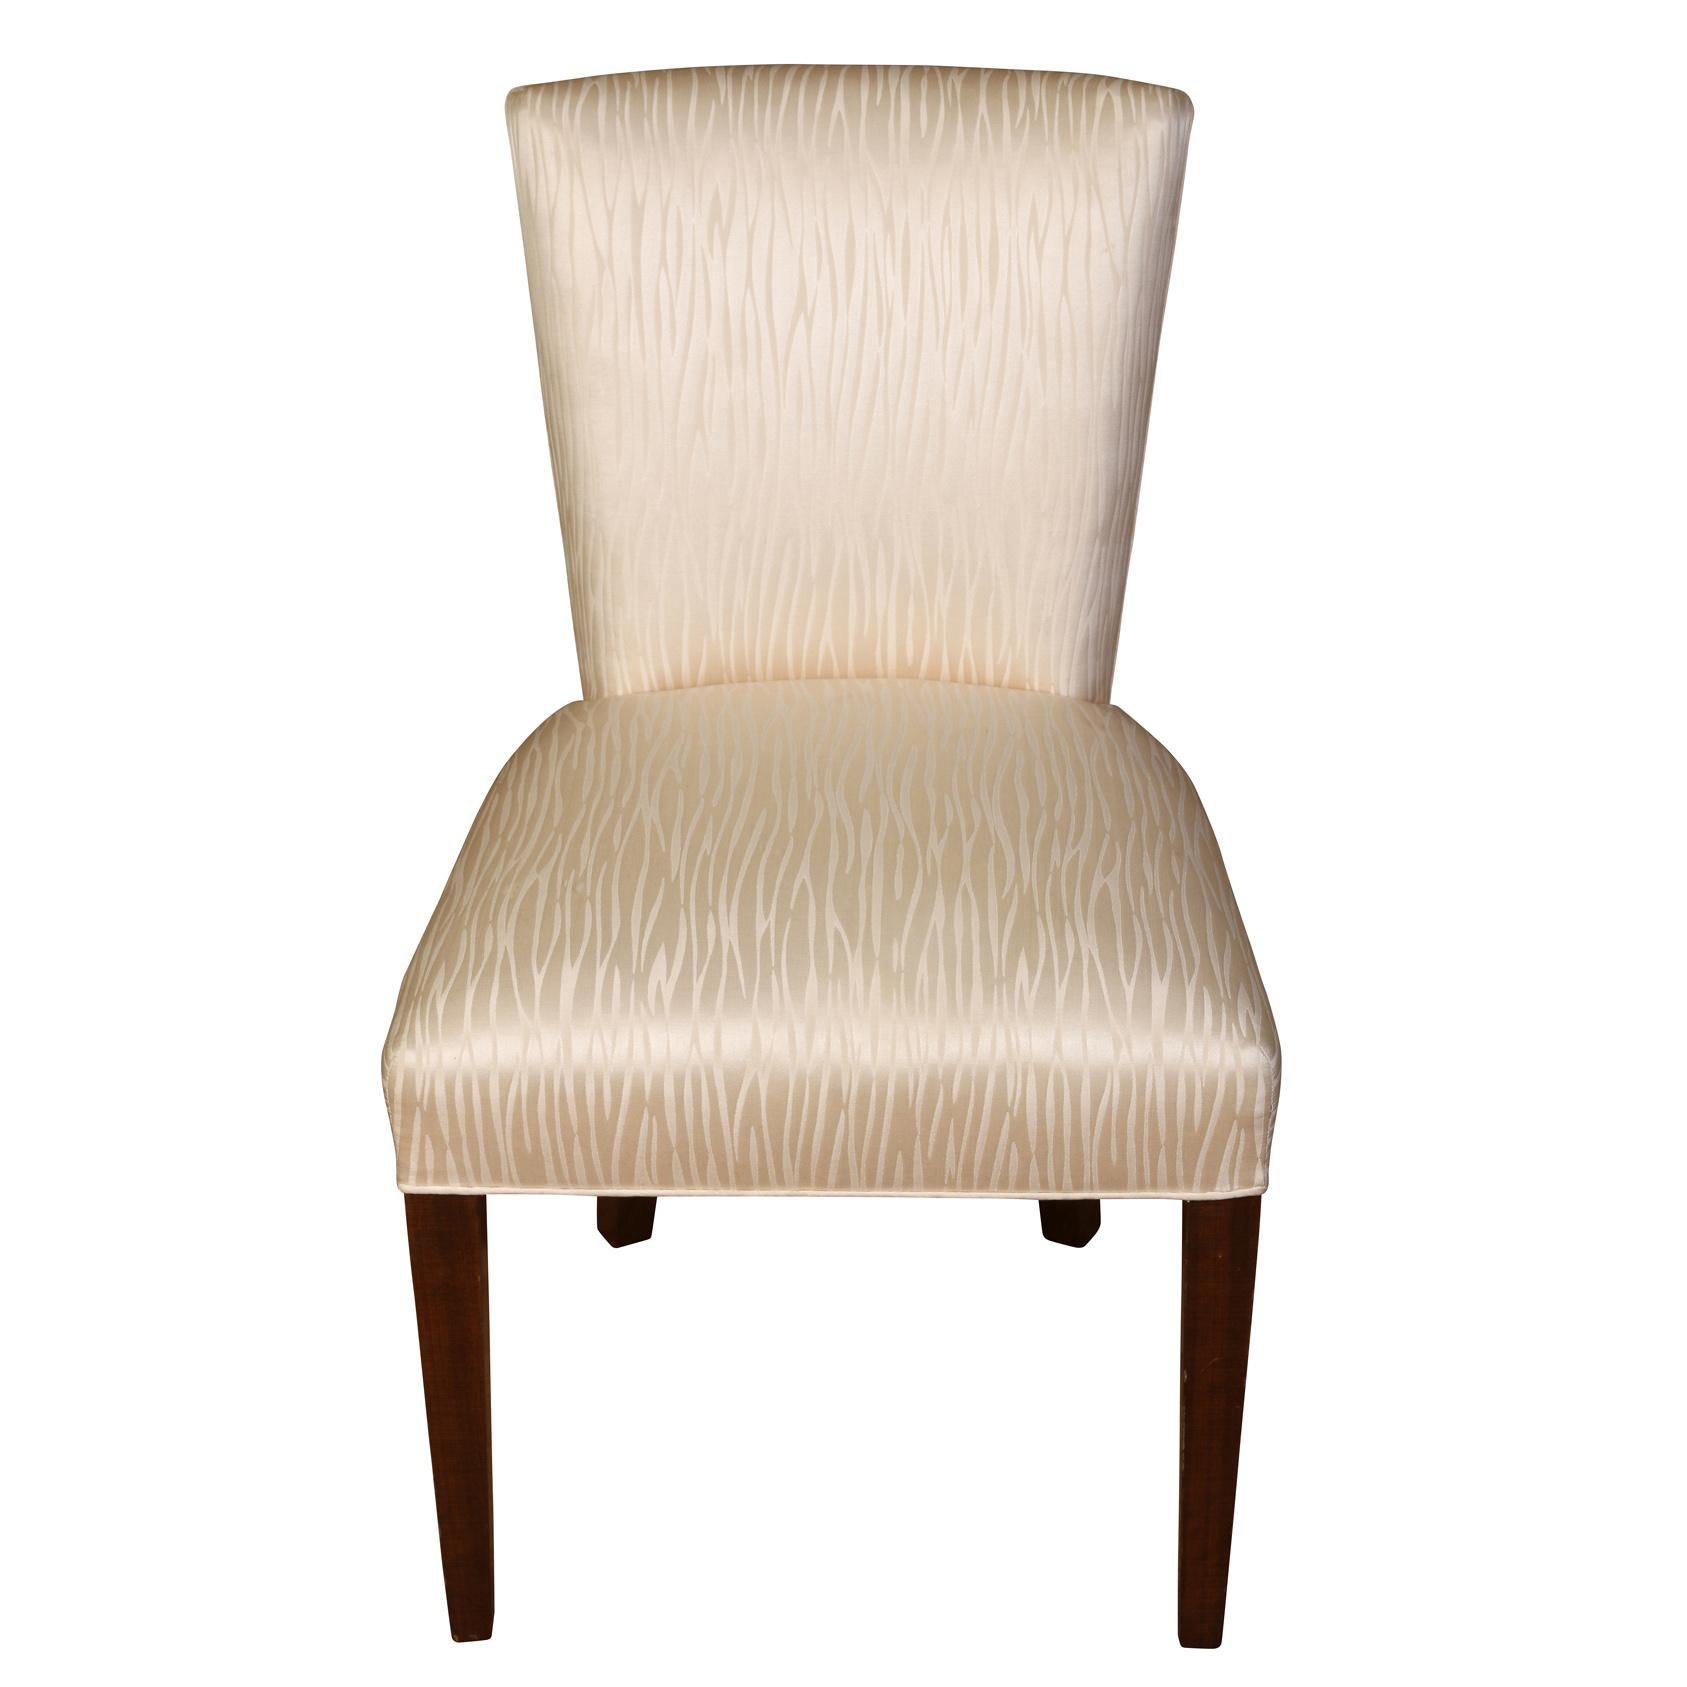 A set of four vintage upholstered dining chairs or games table chairs, modern style with ivory fabric, shaped back and narrow dark wood legs.